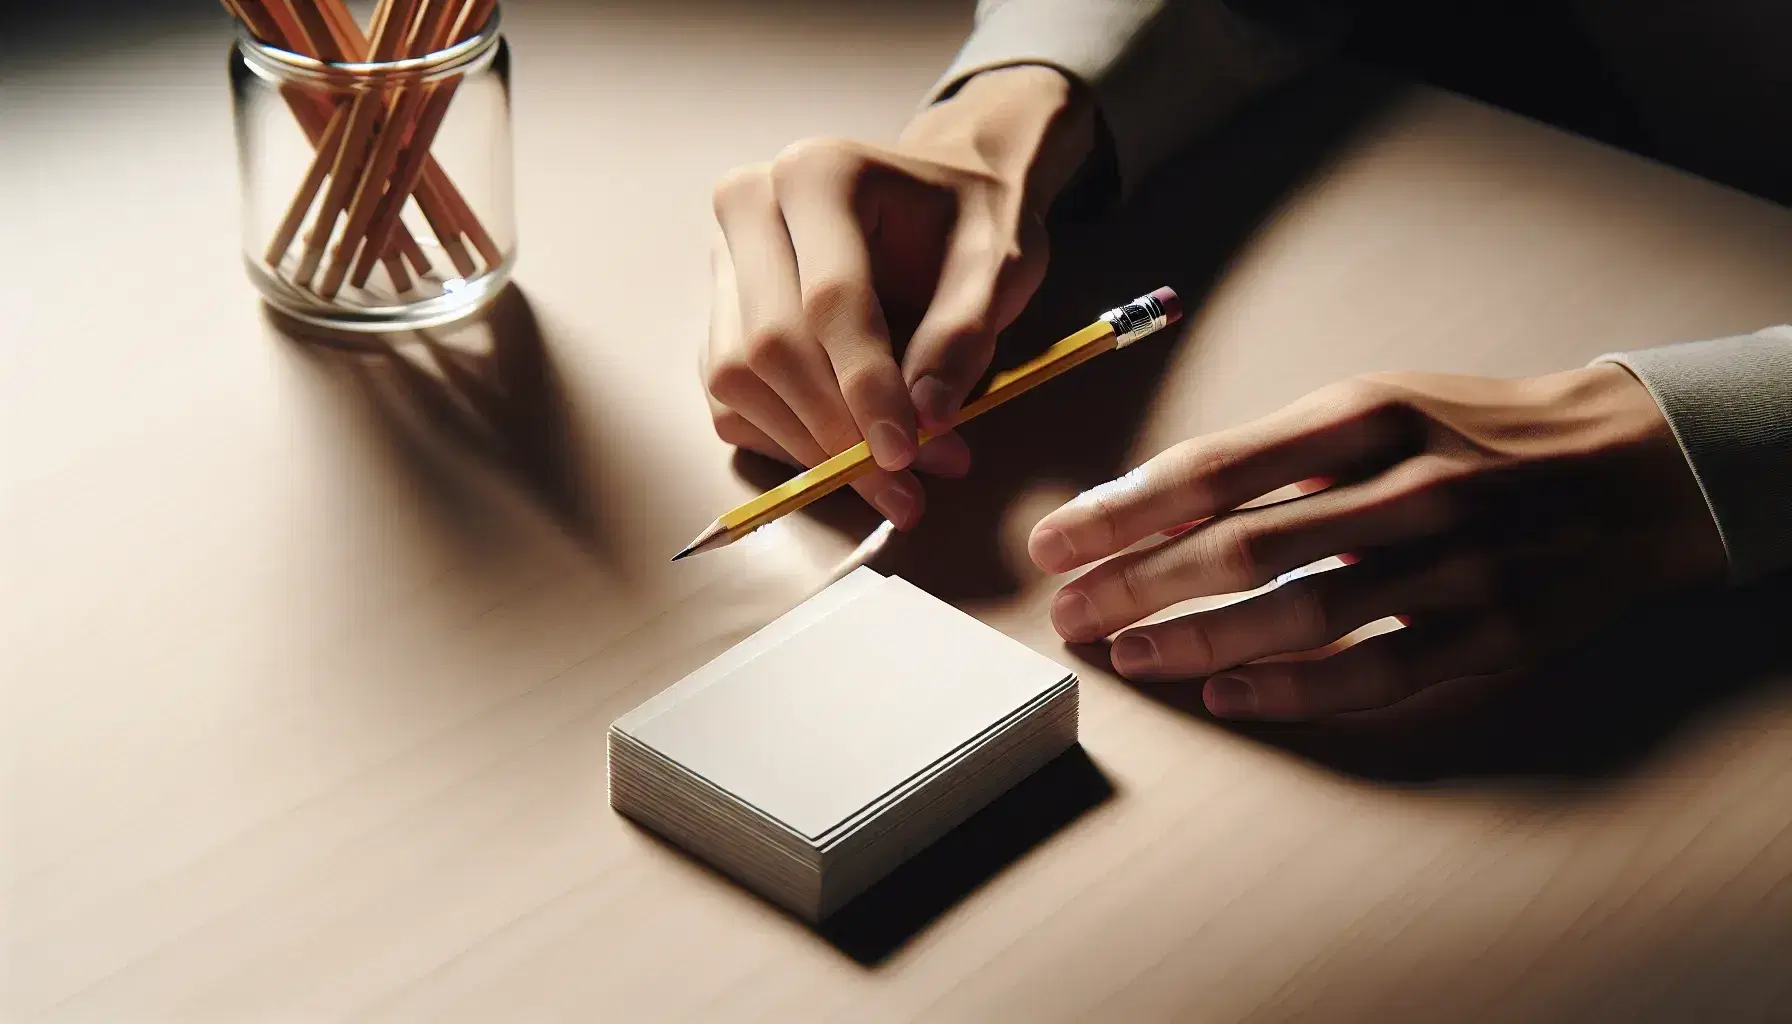 Hands holding yellow pencil and fan of white index cards on wooden desk, jar with blurred pens on background.